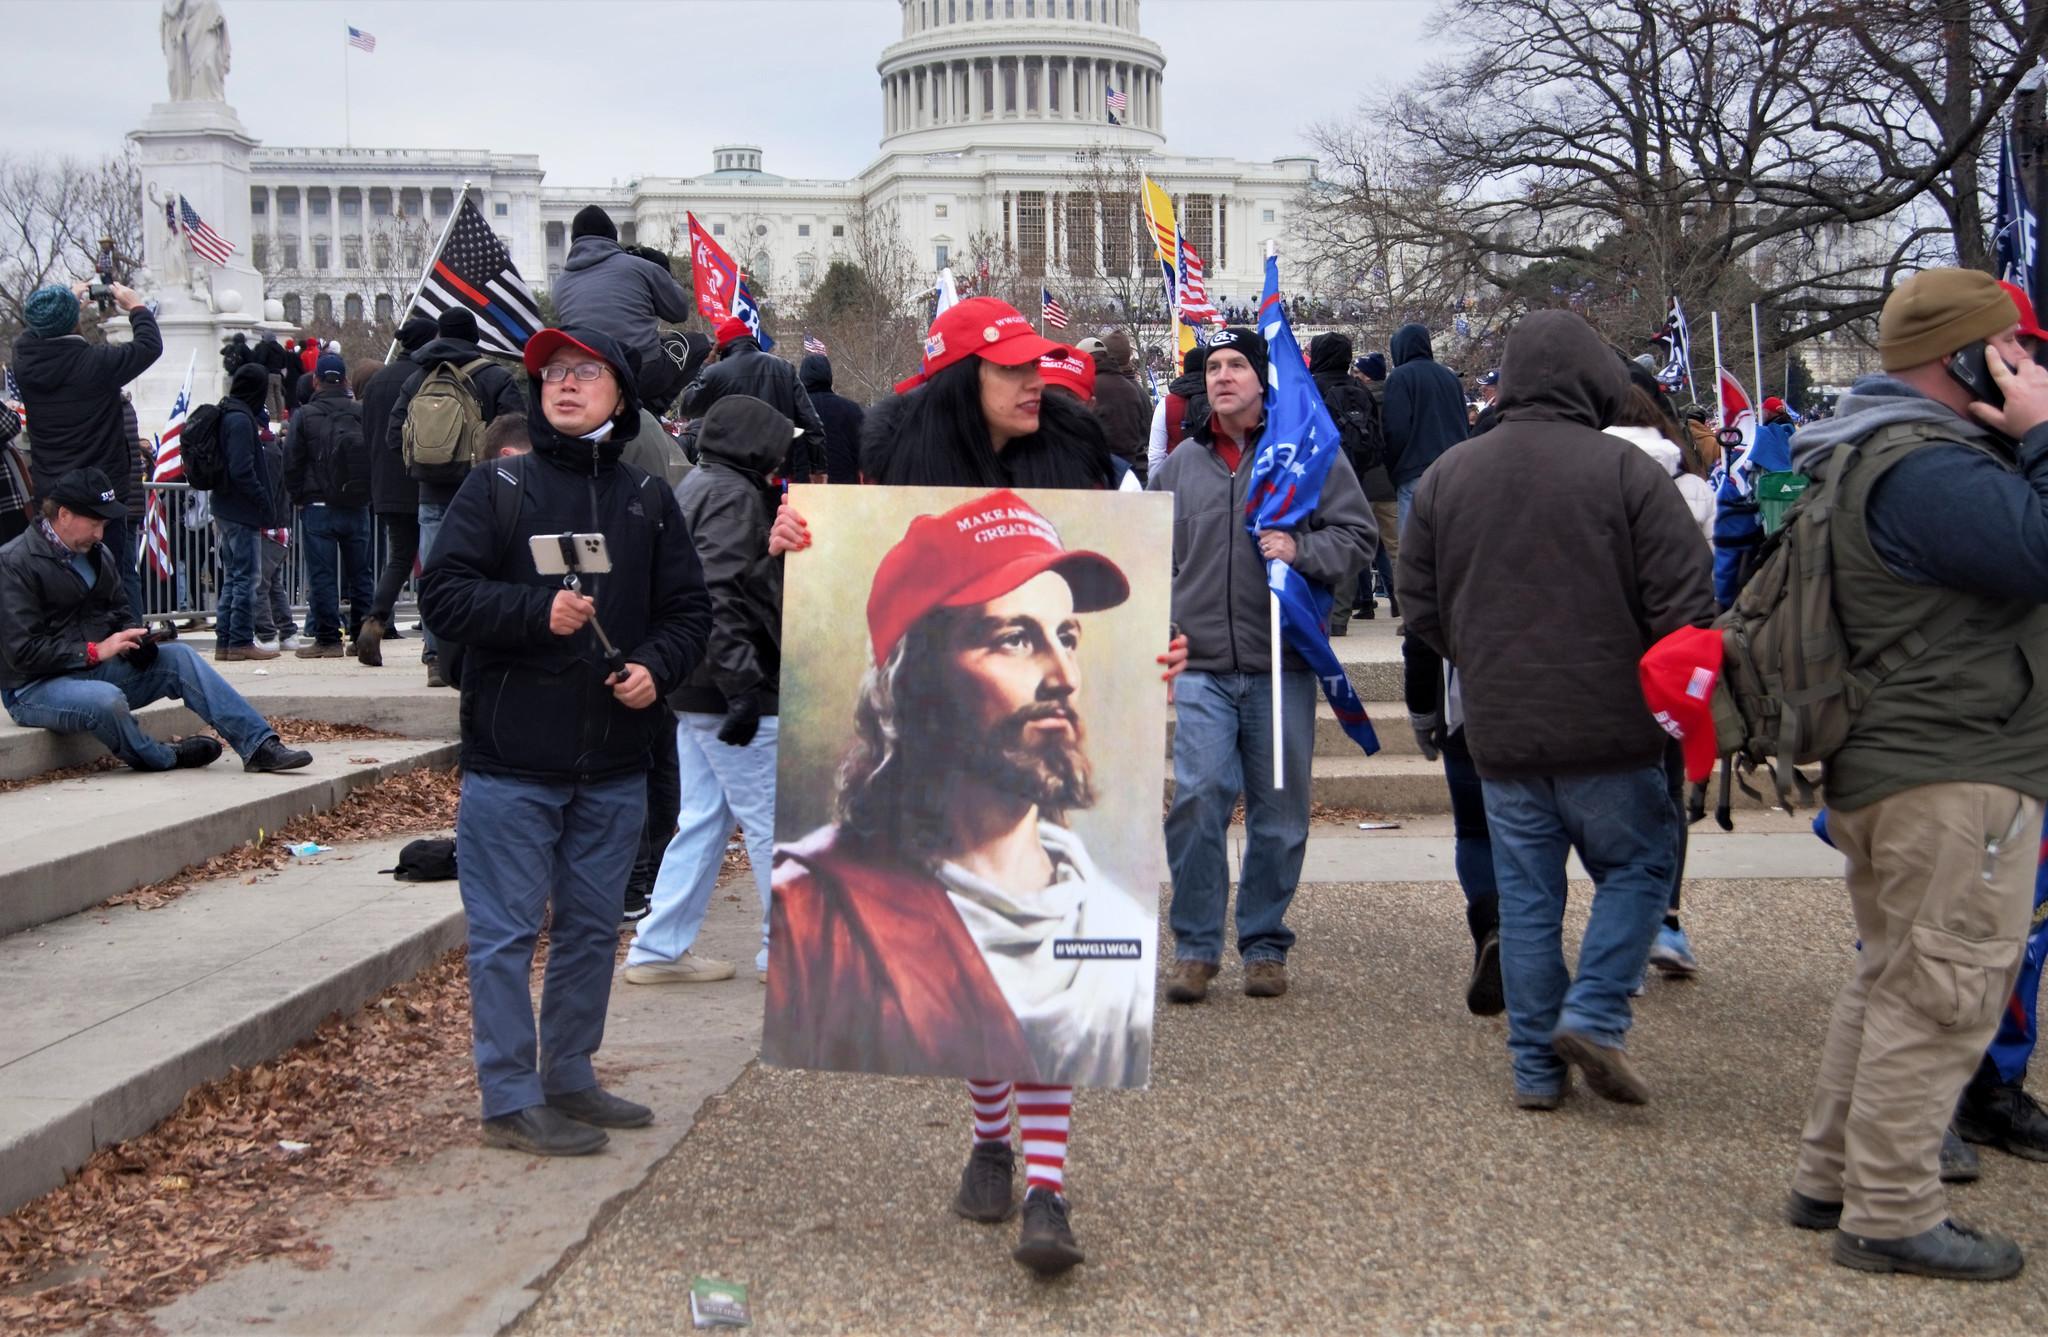 A woman wearing a Make America Great Again cap carrying an image of Jesus wearing a MAGA hat with "WWG1WGA" on his lapel